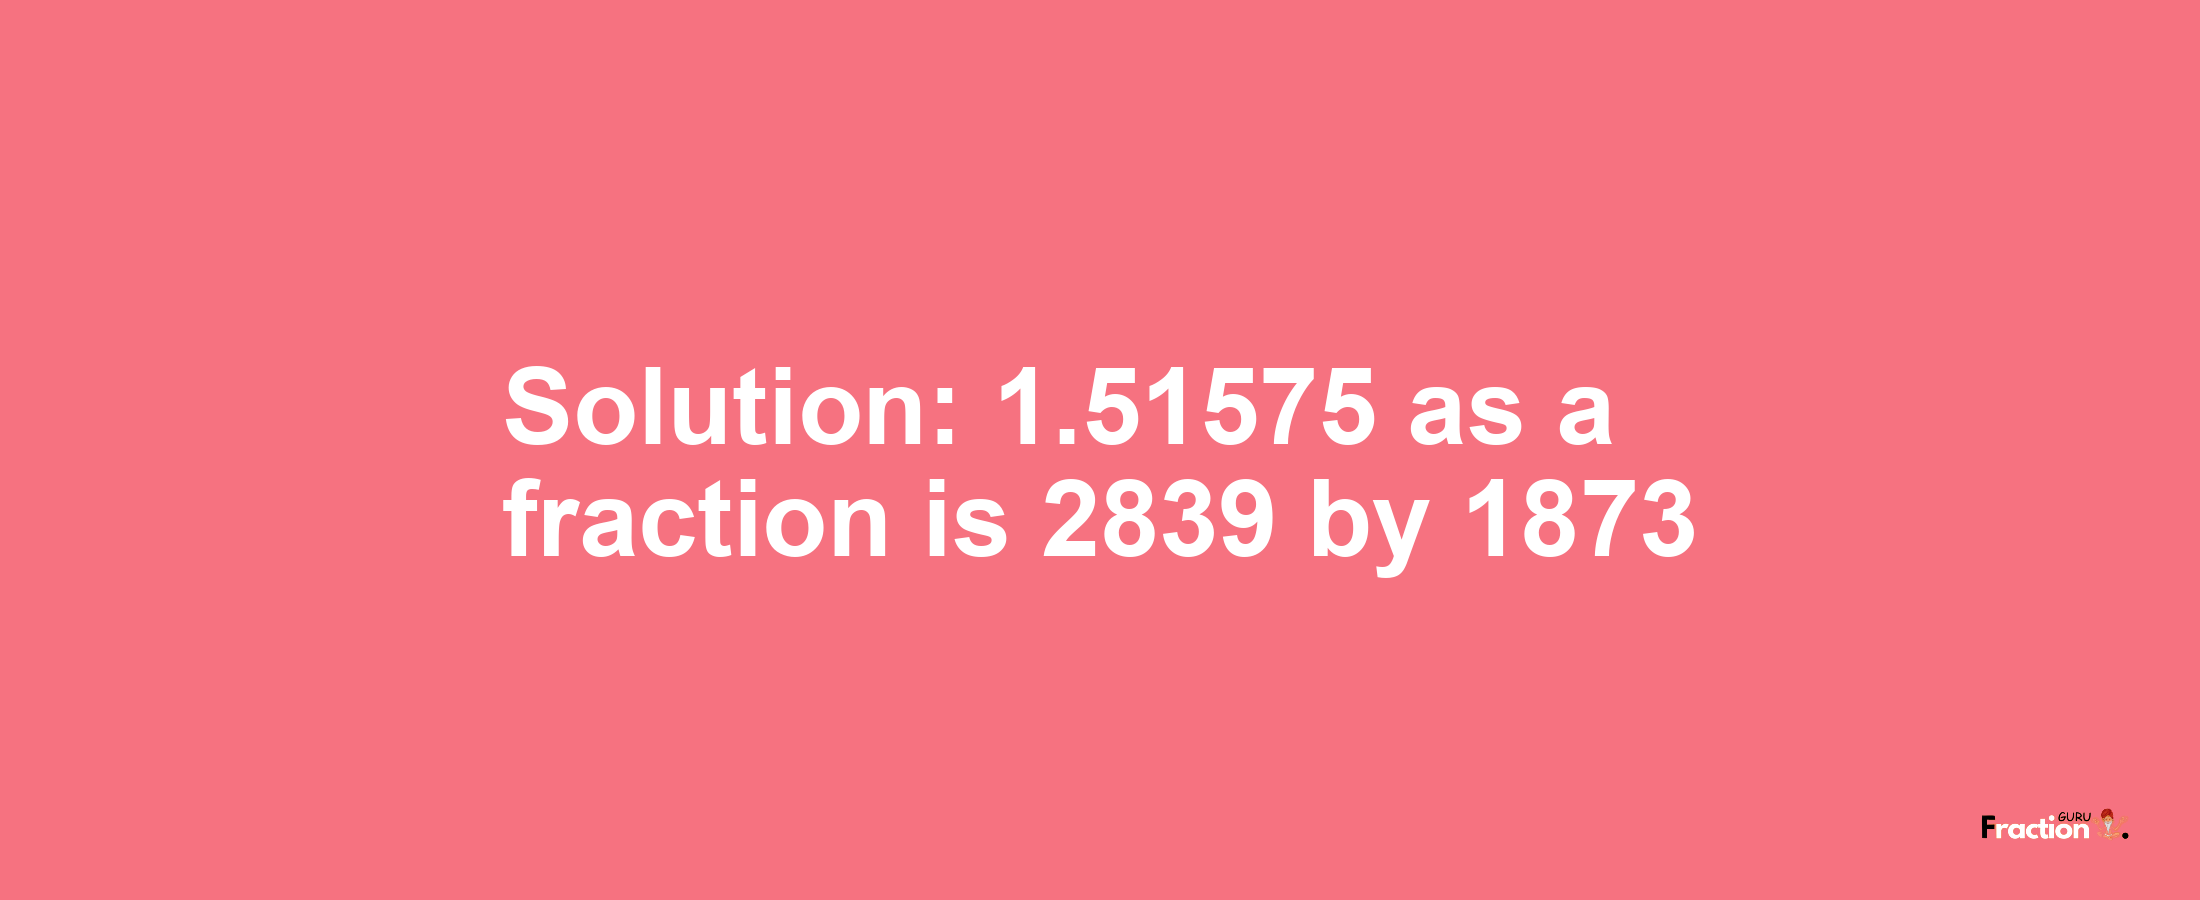 Solution:1.51575 as a fraction is 2839/1873